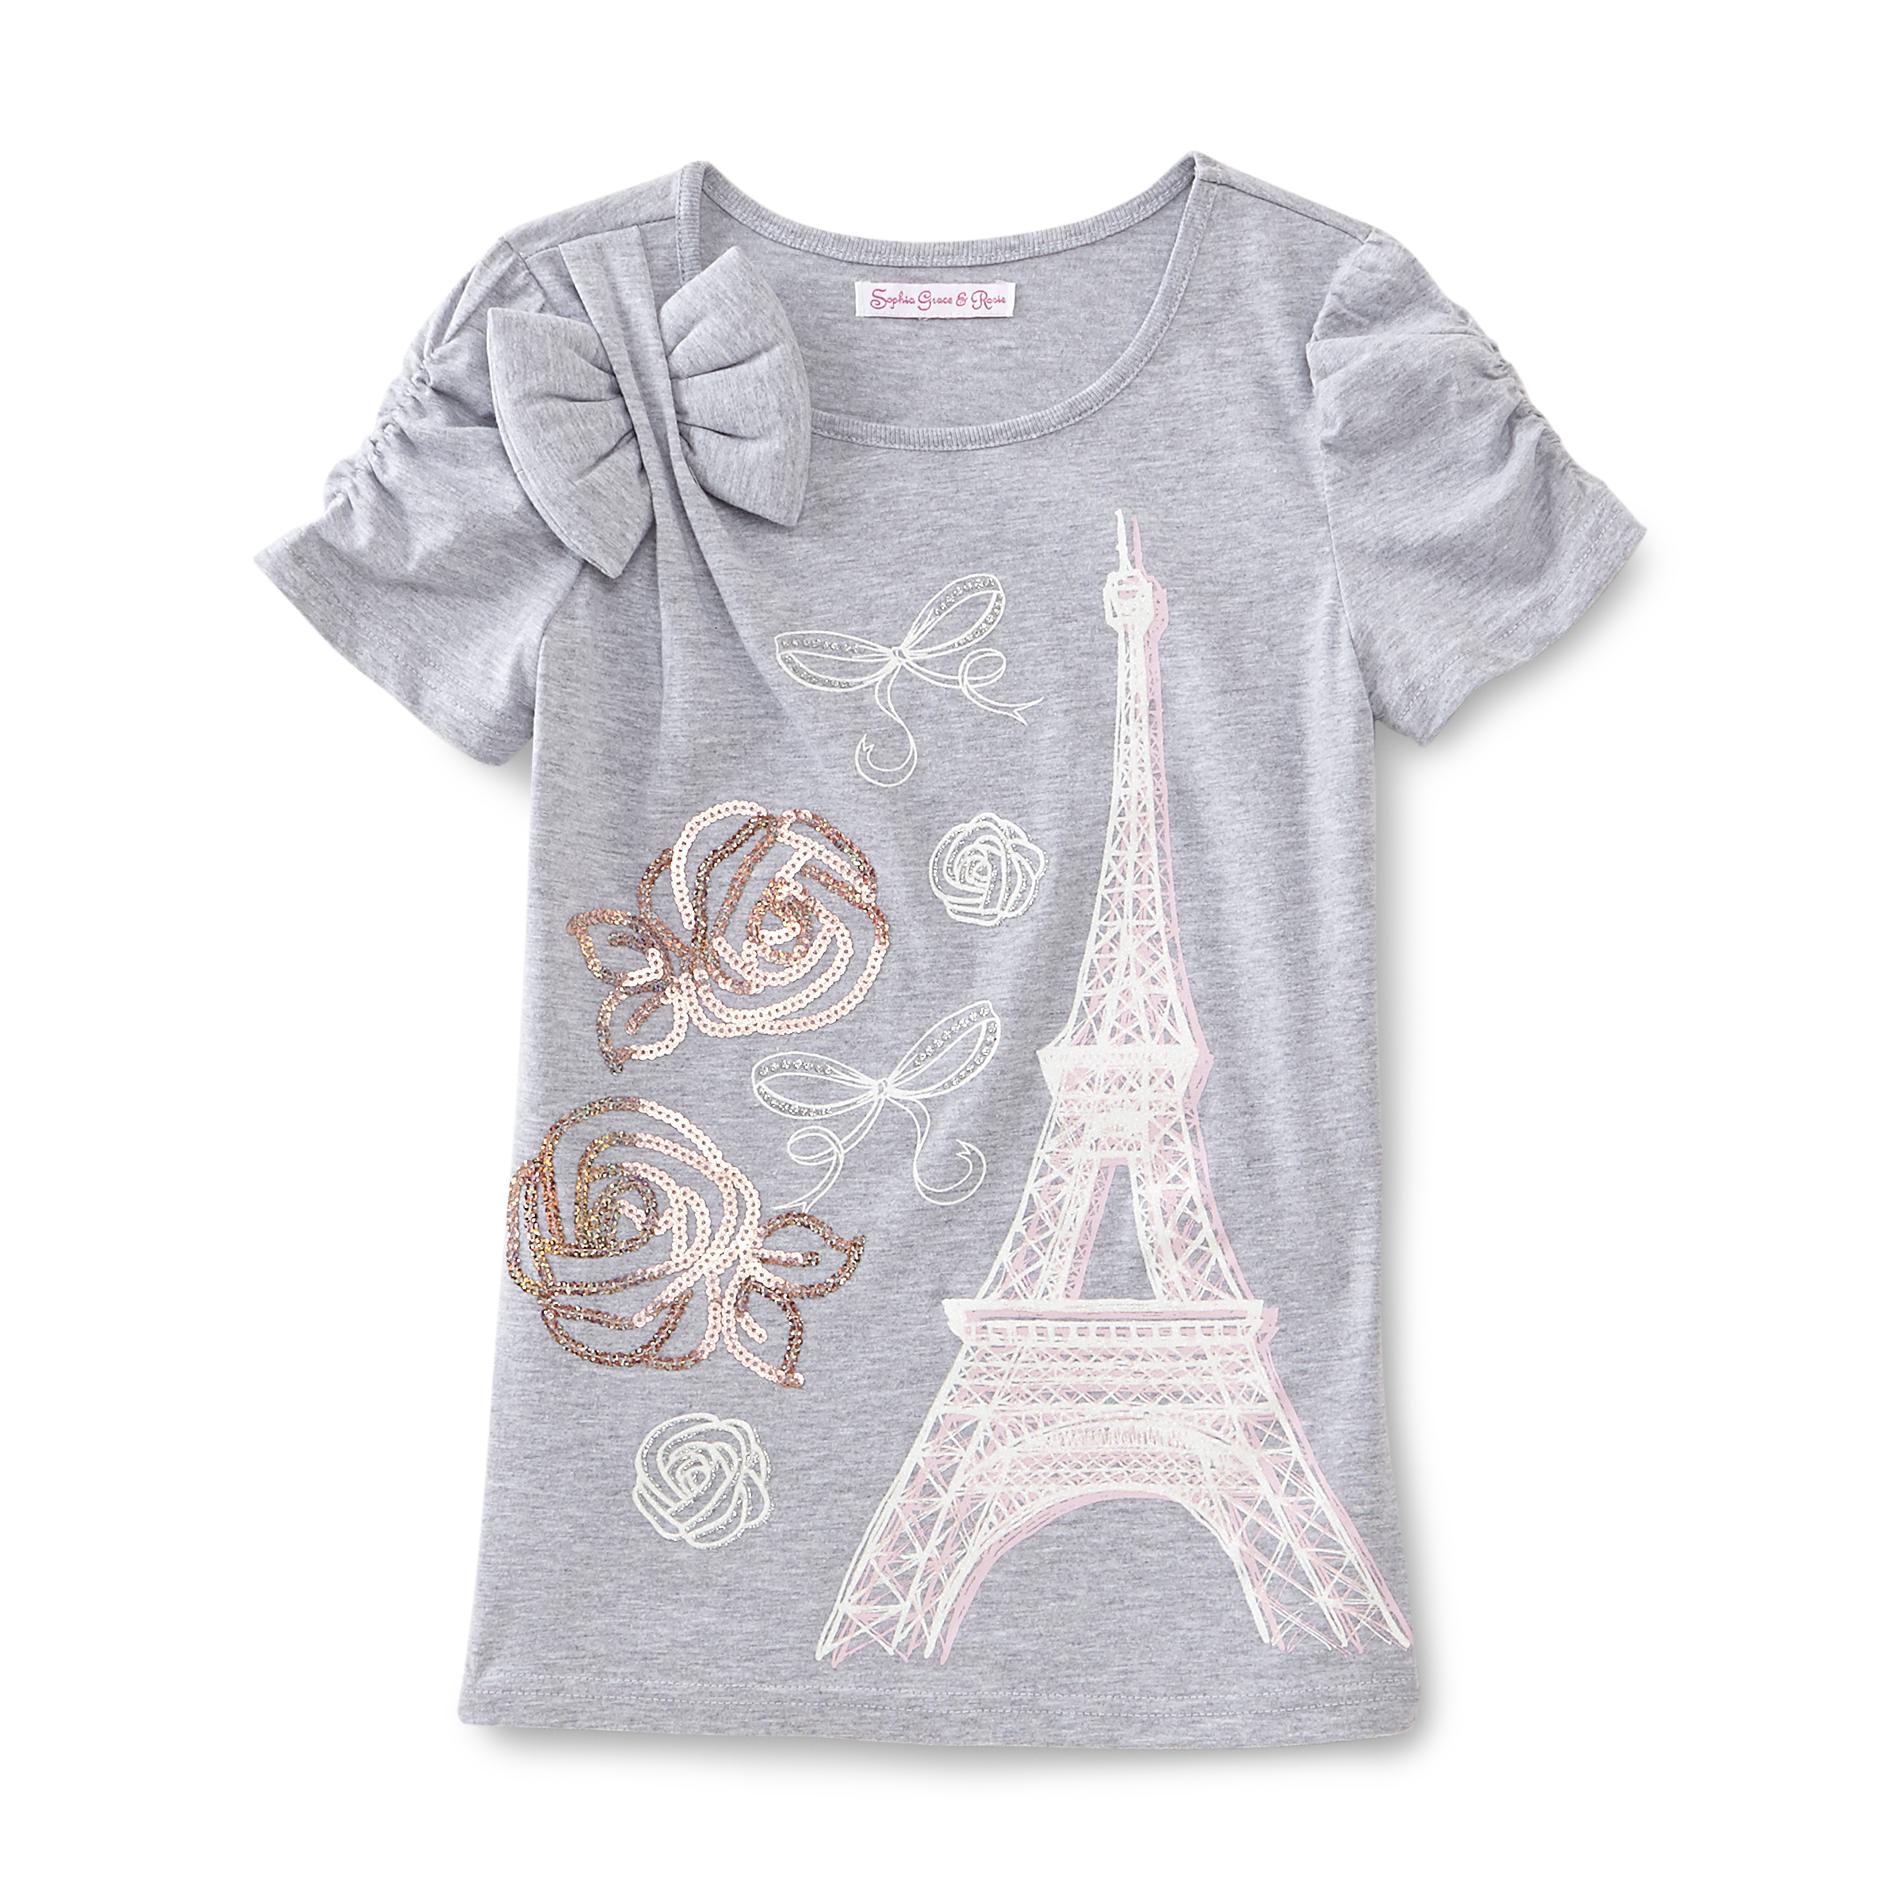 Girl's Embellished Graphic T-Shirt - Eiffel Tower